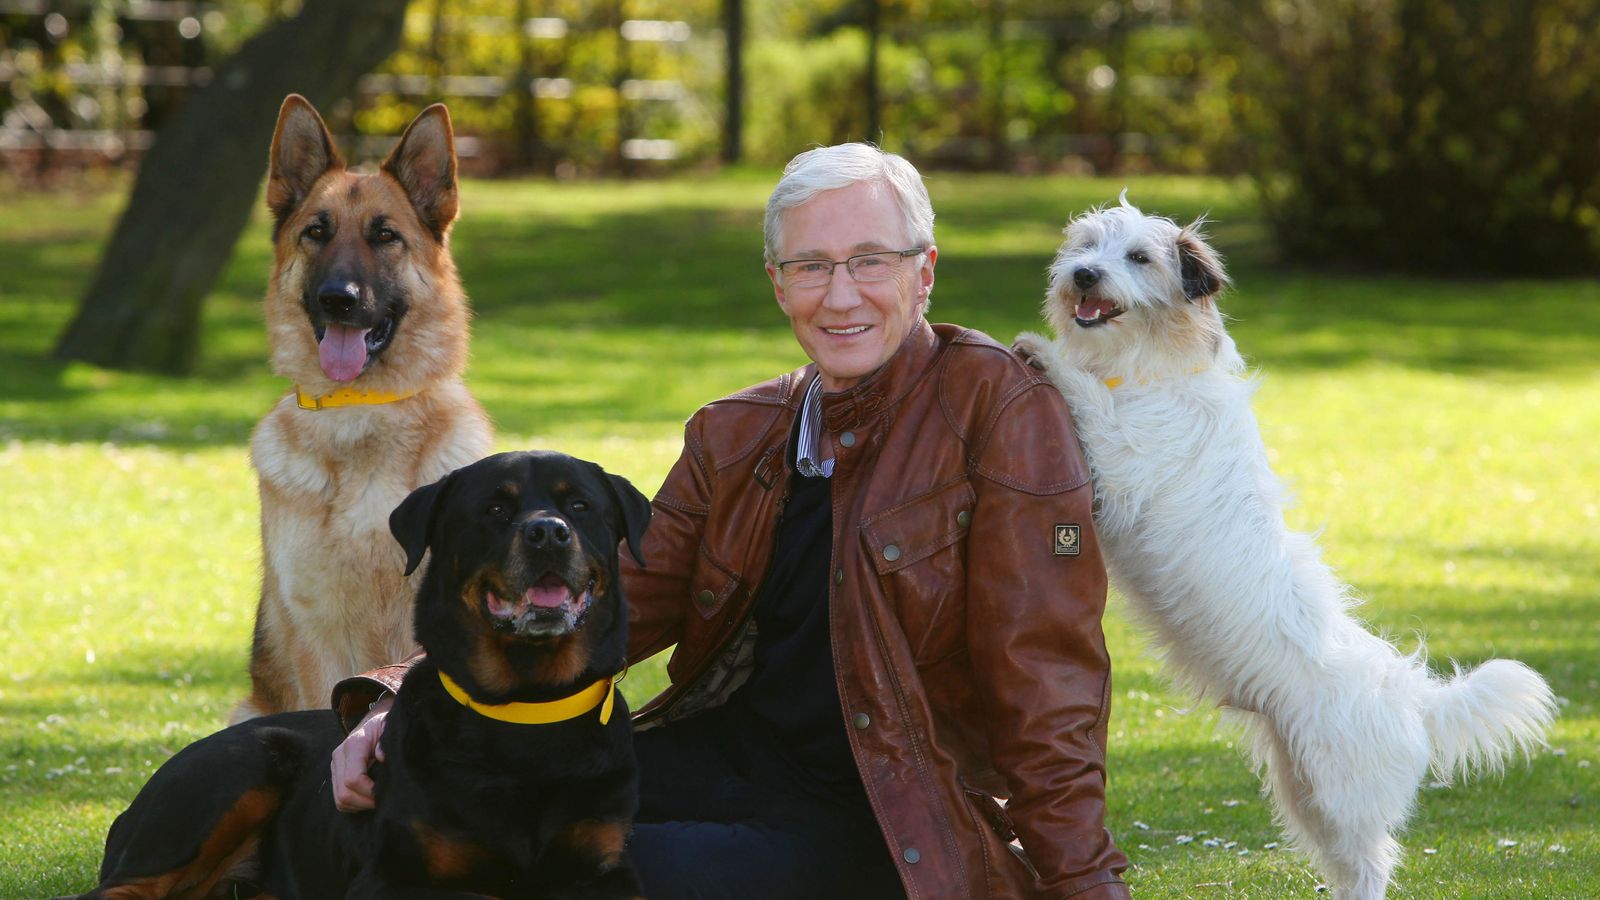 Paul O'Grady's funeral to feature guard of honour by dogs from his beloved Battersea rescue centre